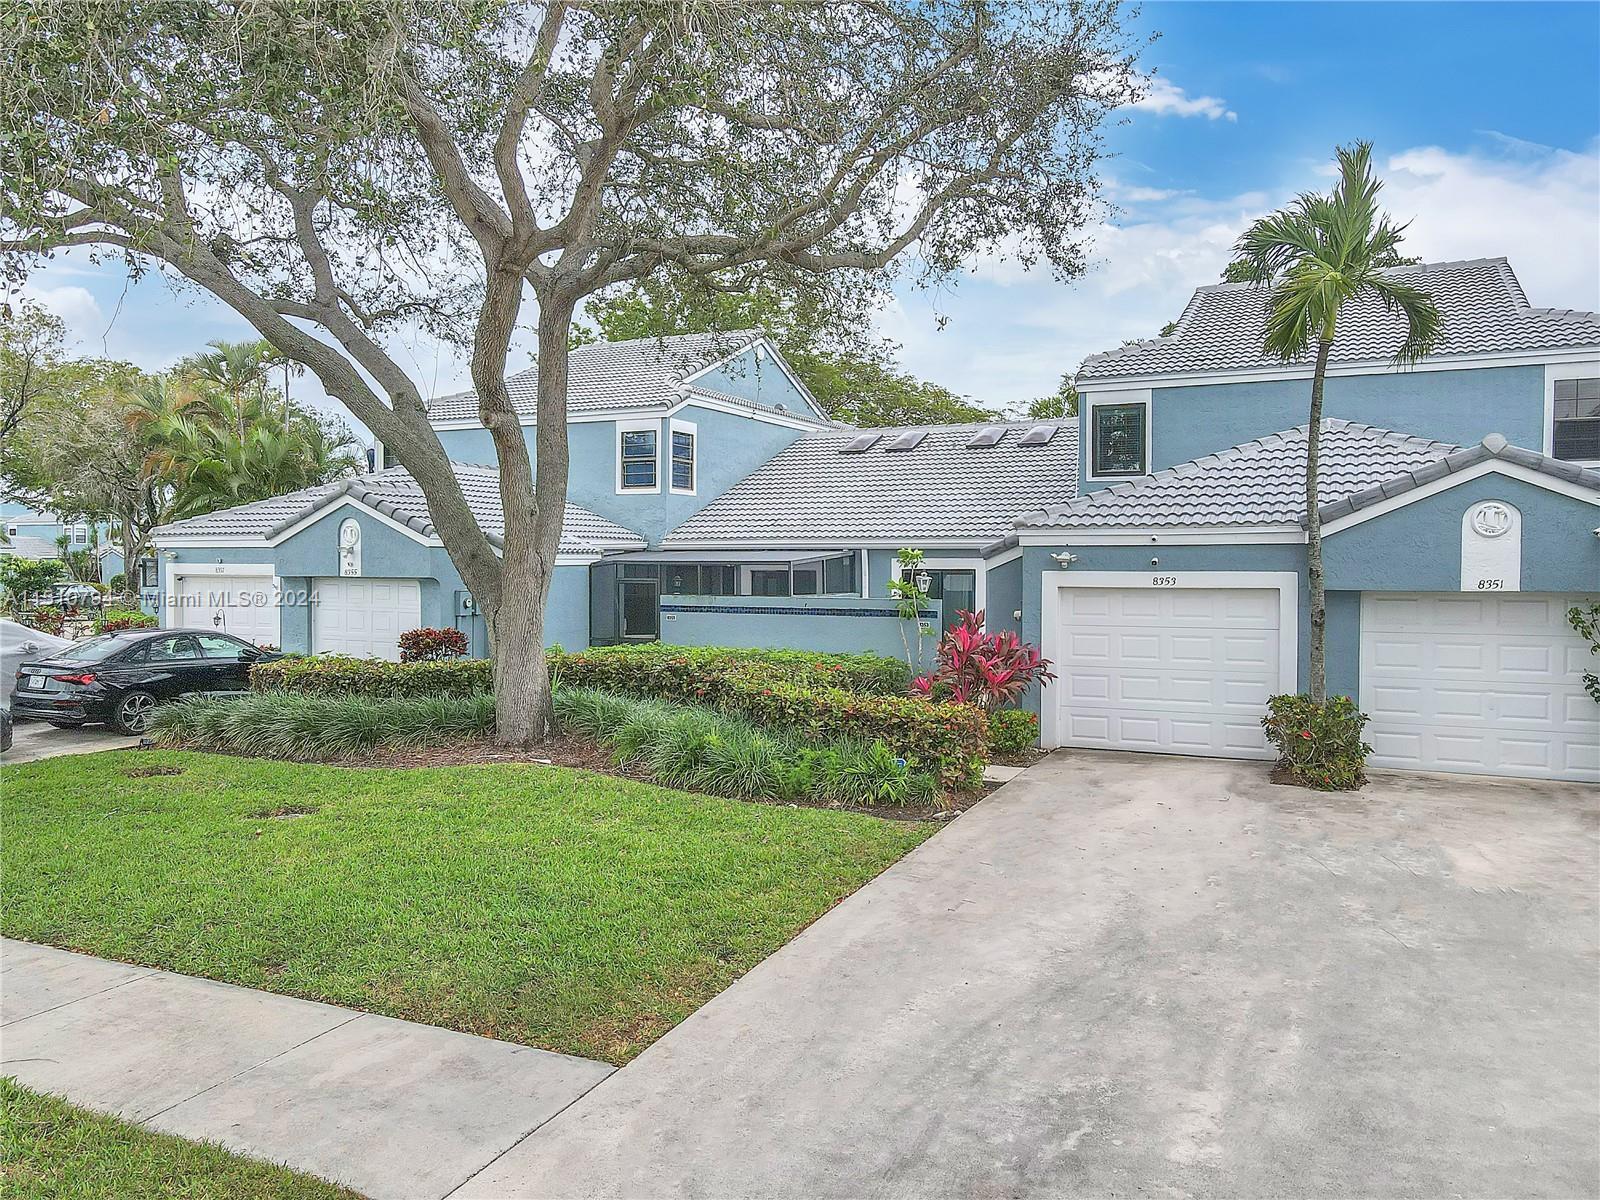 Photo of 8353 Waterford Ave in Tamarac, FL